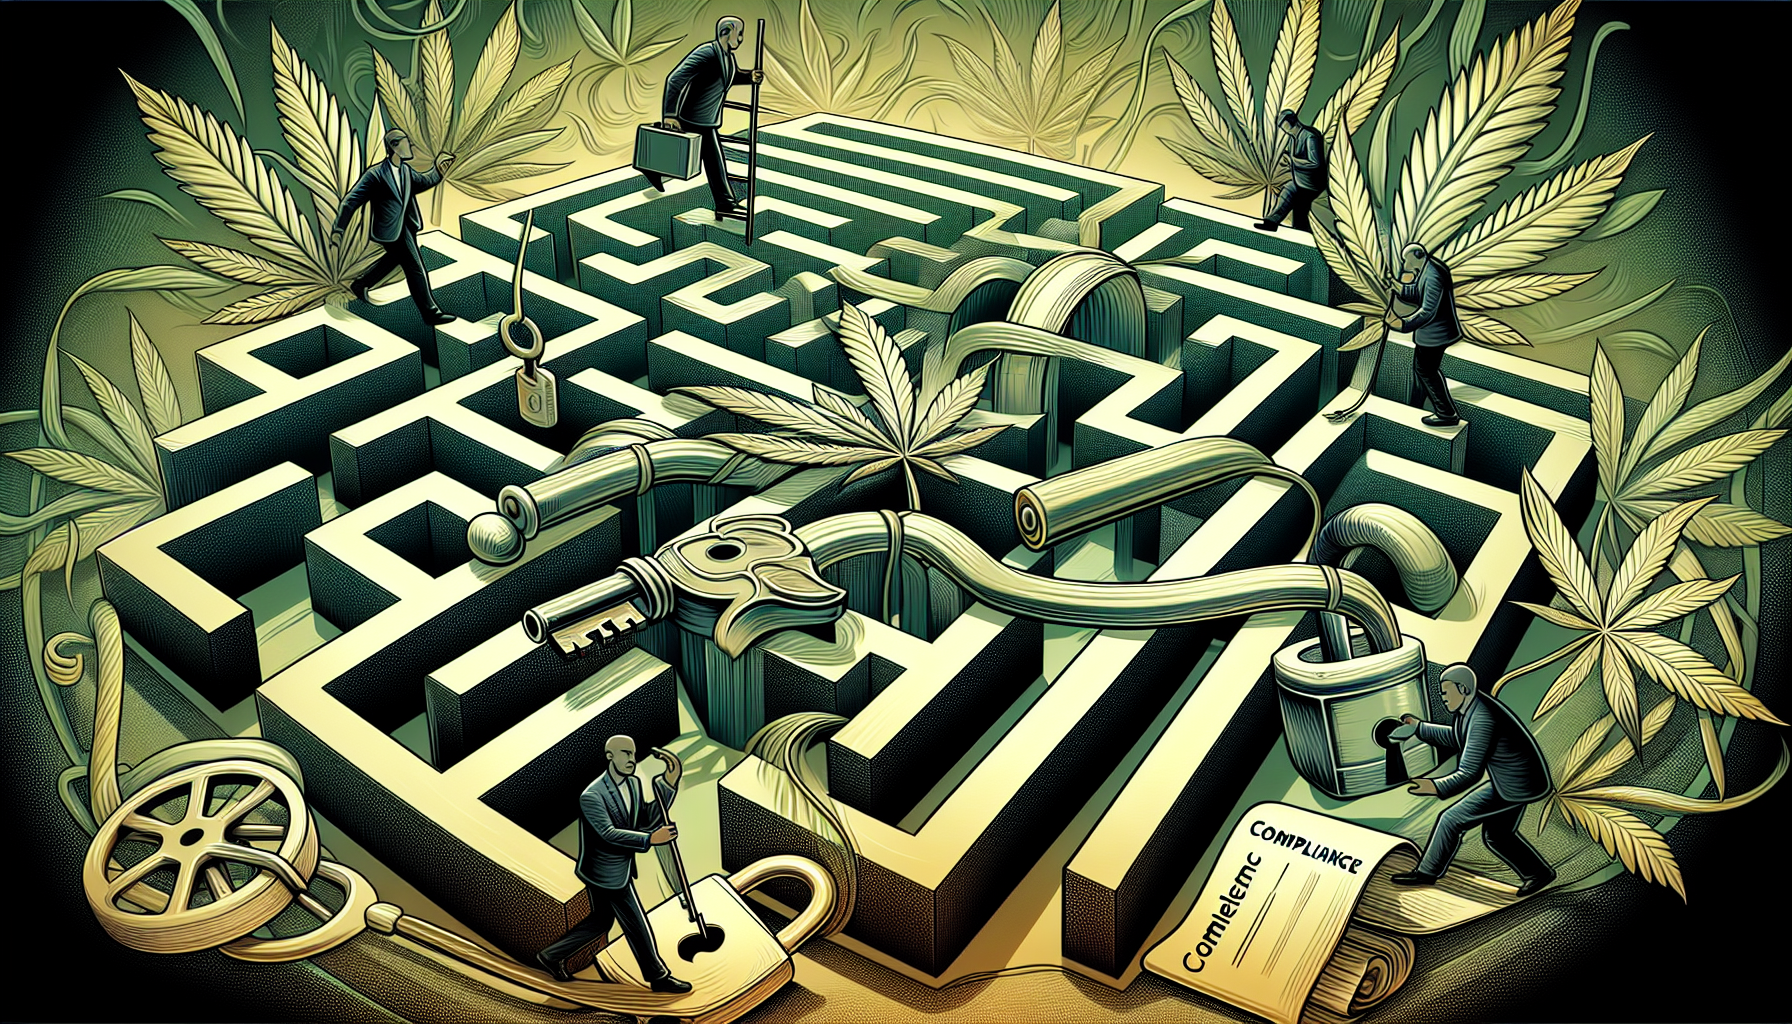 SAFER BANKING ACT MAZE